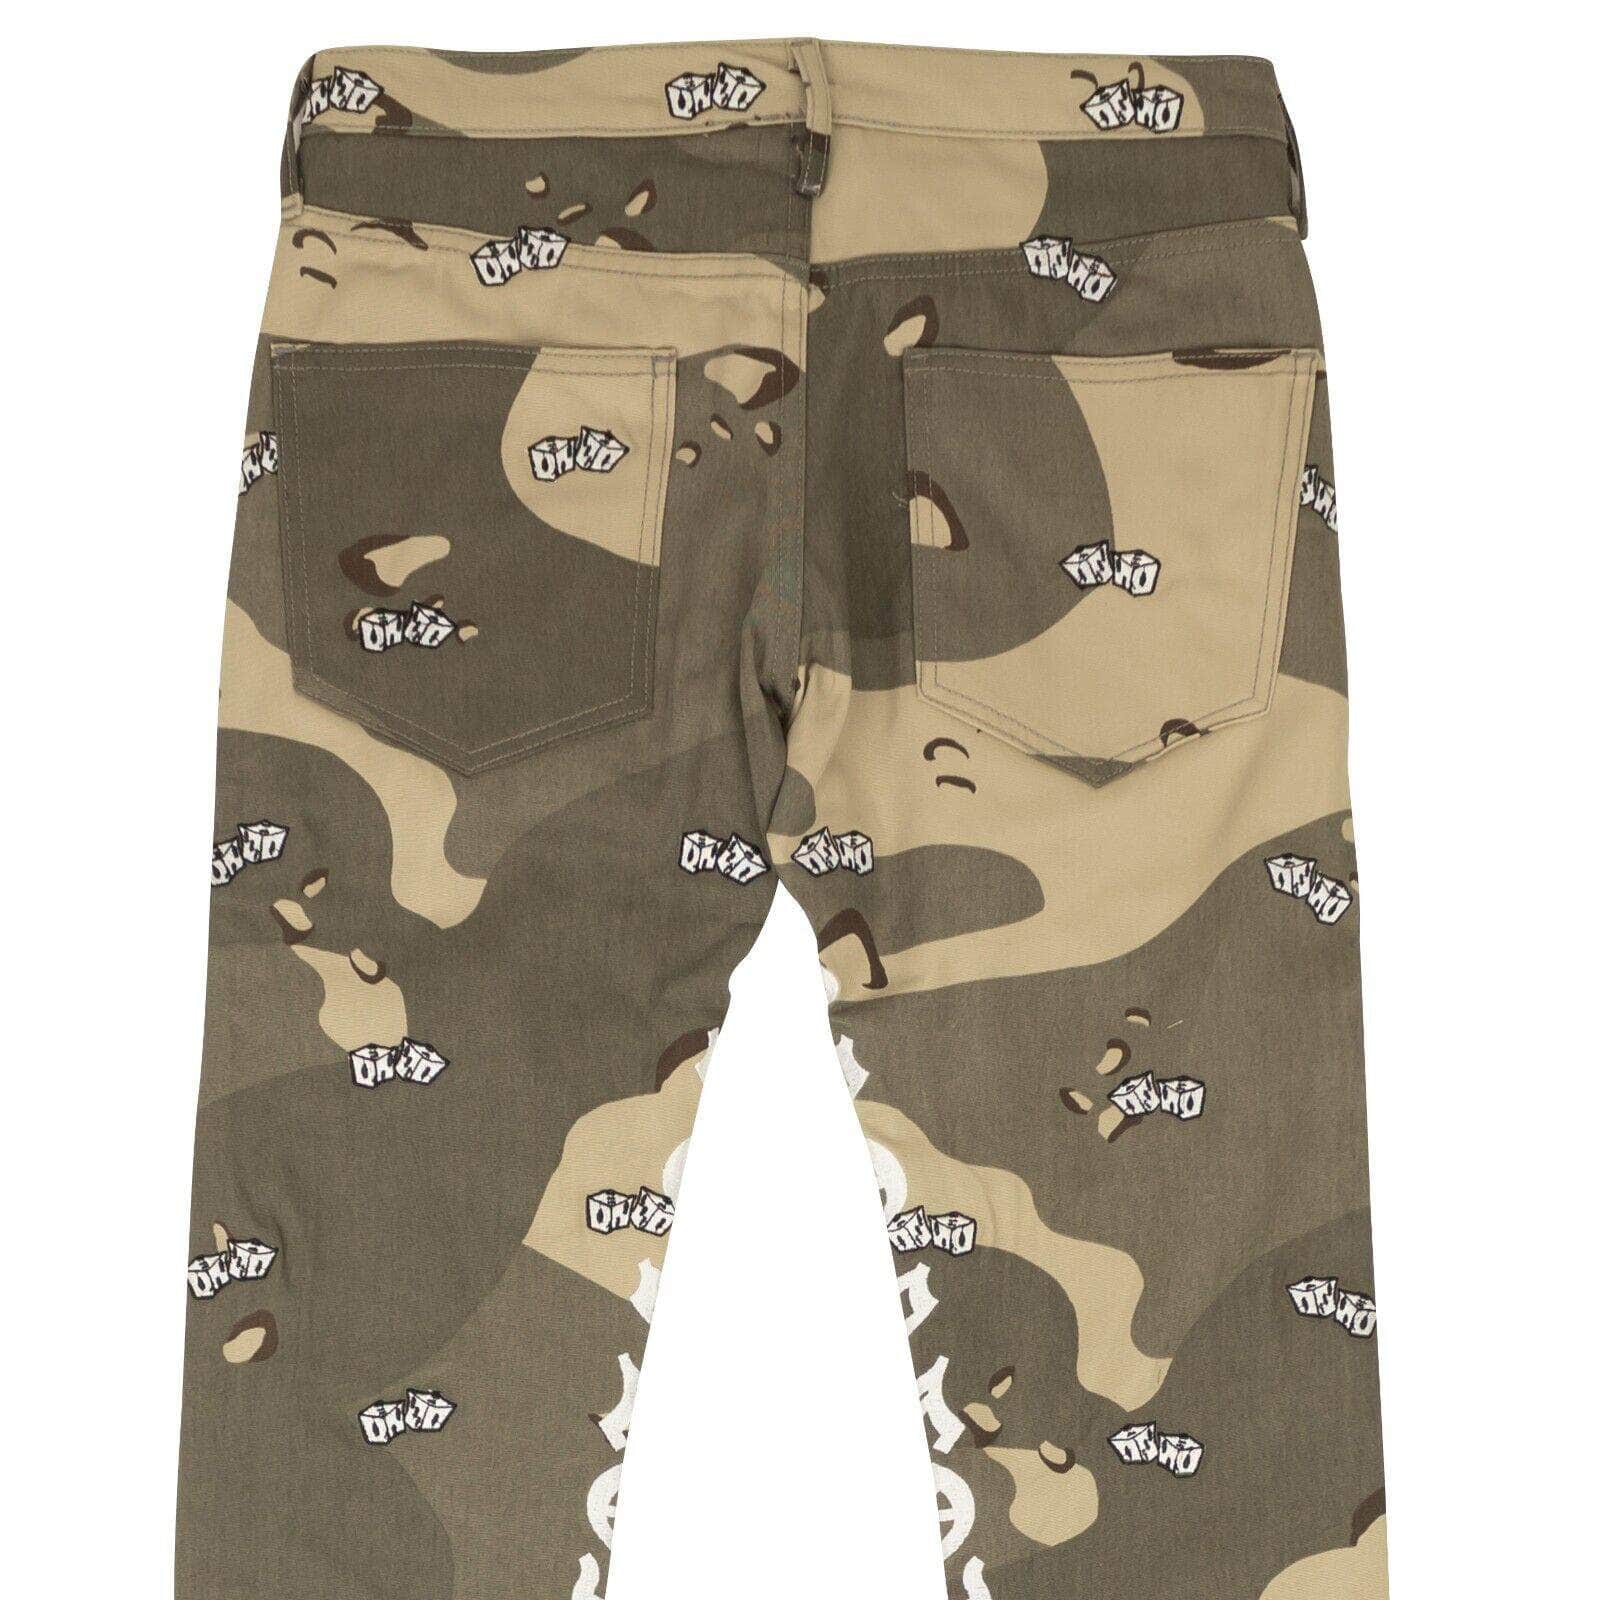 Vlone 1000-2000, channelenable-all, chicmi, couponcollection, gender-mens, main-clothing, mens-shoes, mens-straight-fit-jeans, size-m, size-s, size-xl, size-xxl, vlone Beige Green Desert Camo Dice 5 Pocket Jeans